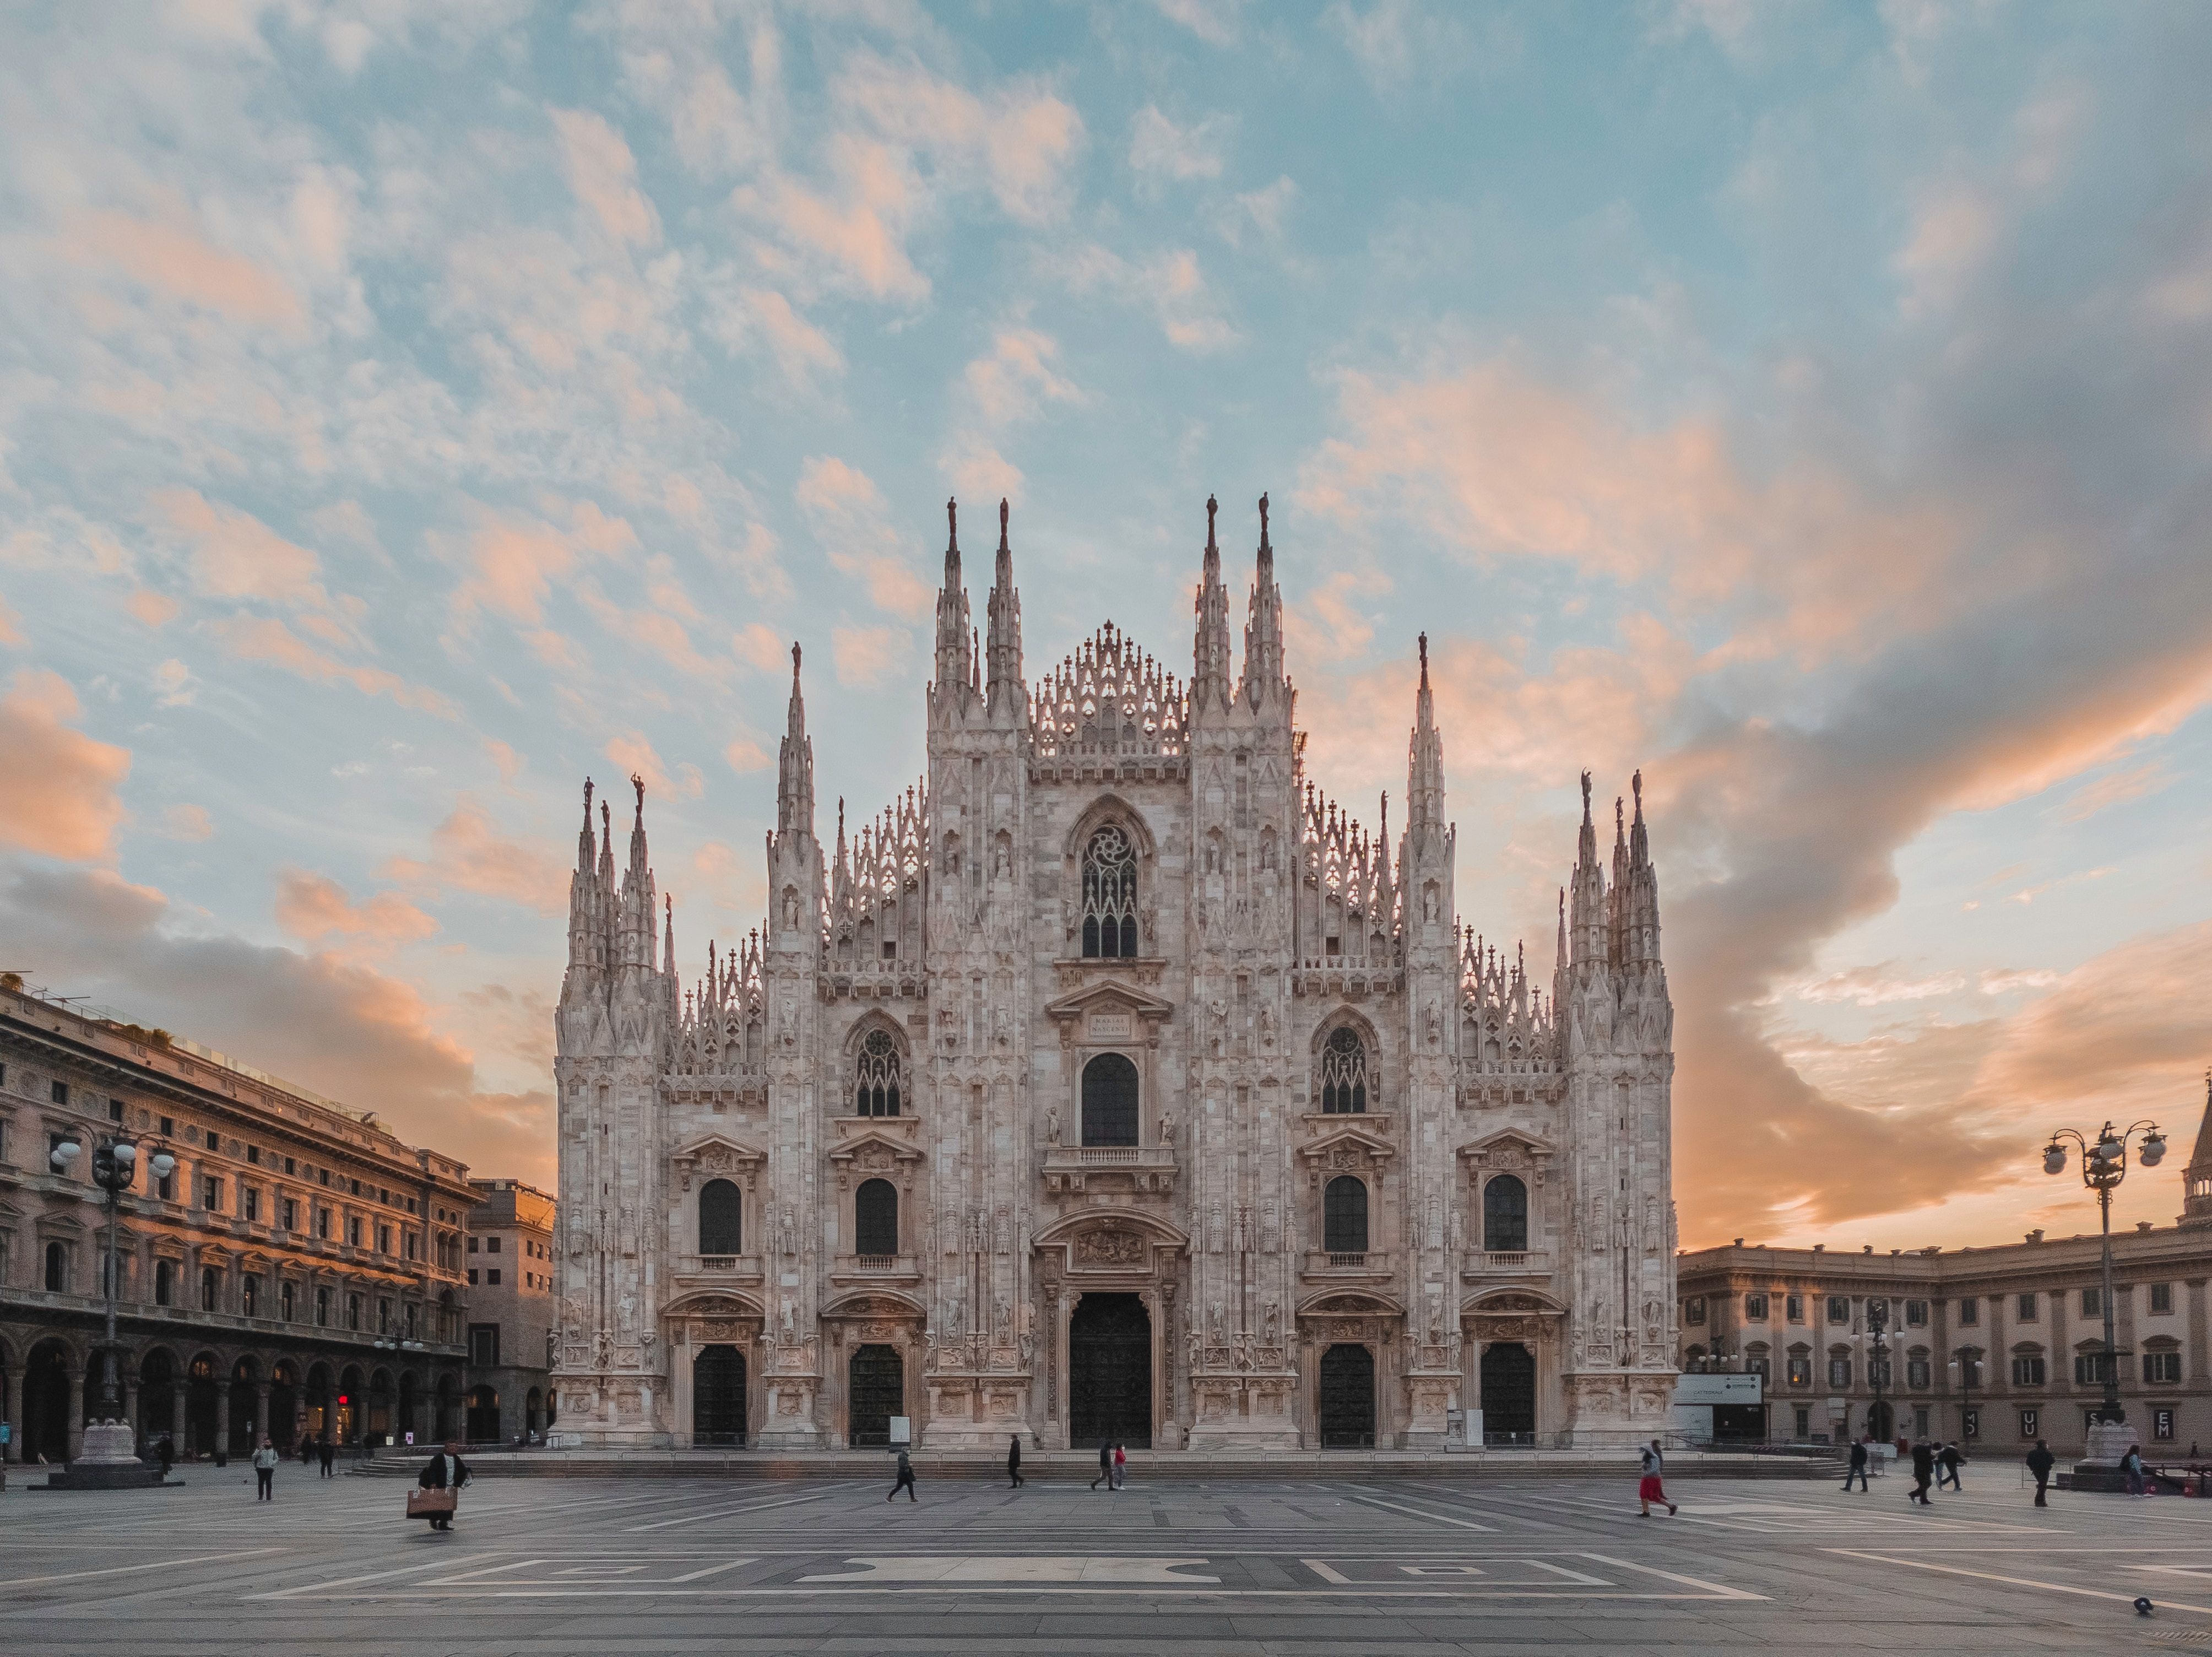 The sunset lingers over the Duomo di Milano, the second largest church in  Italy after St. Peter's Basilica in Rome …